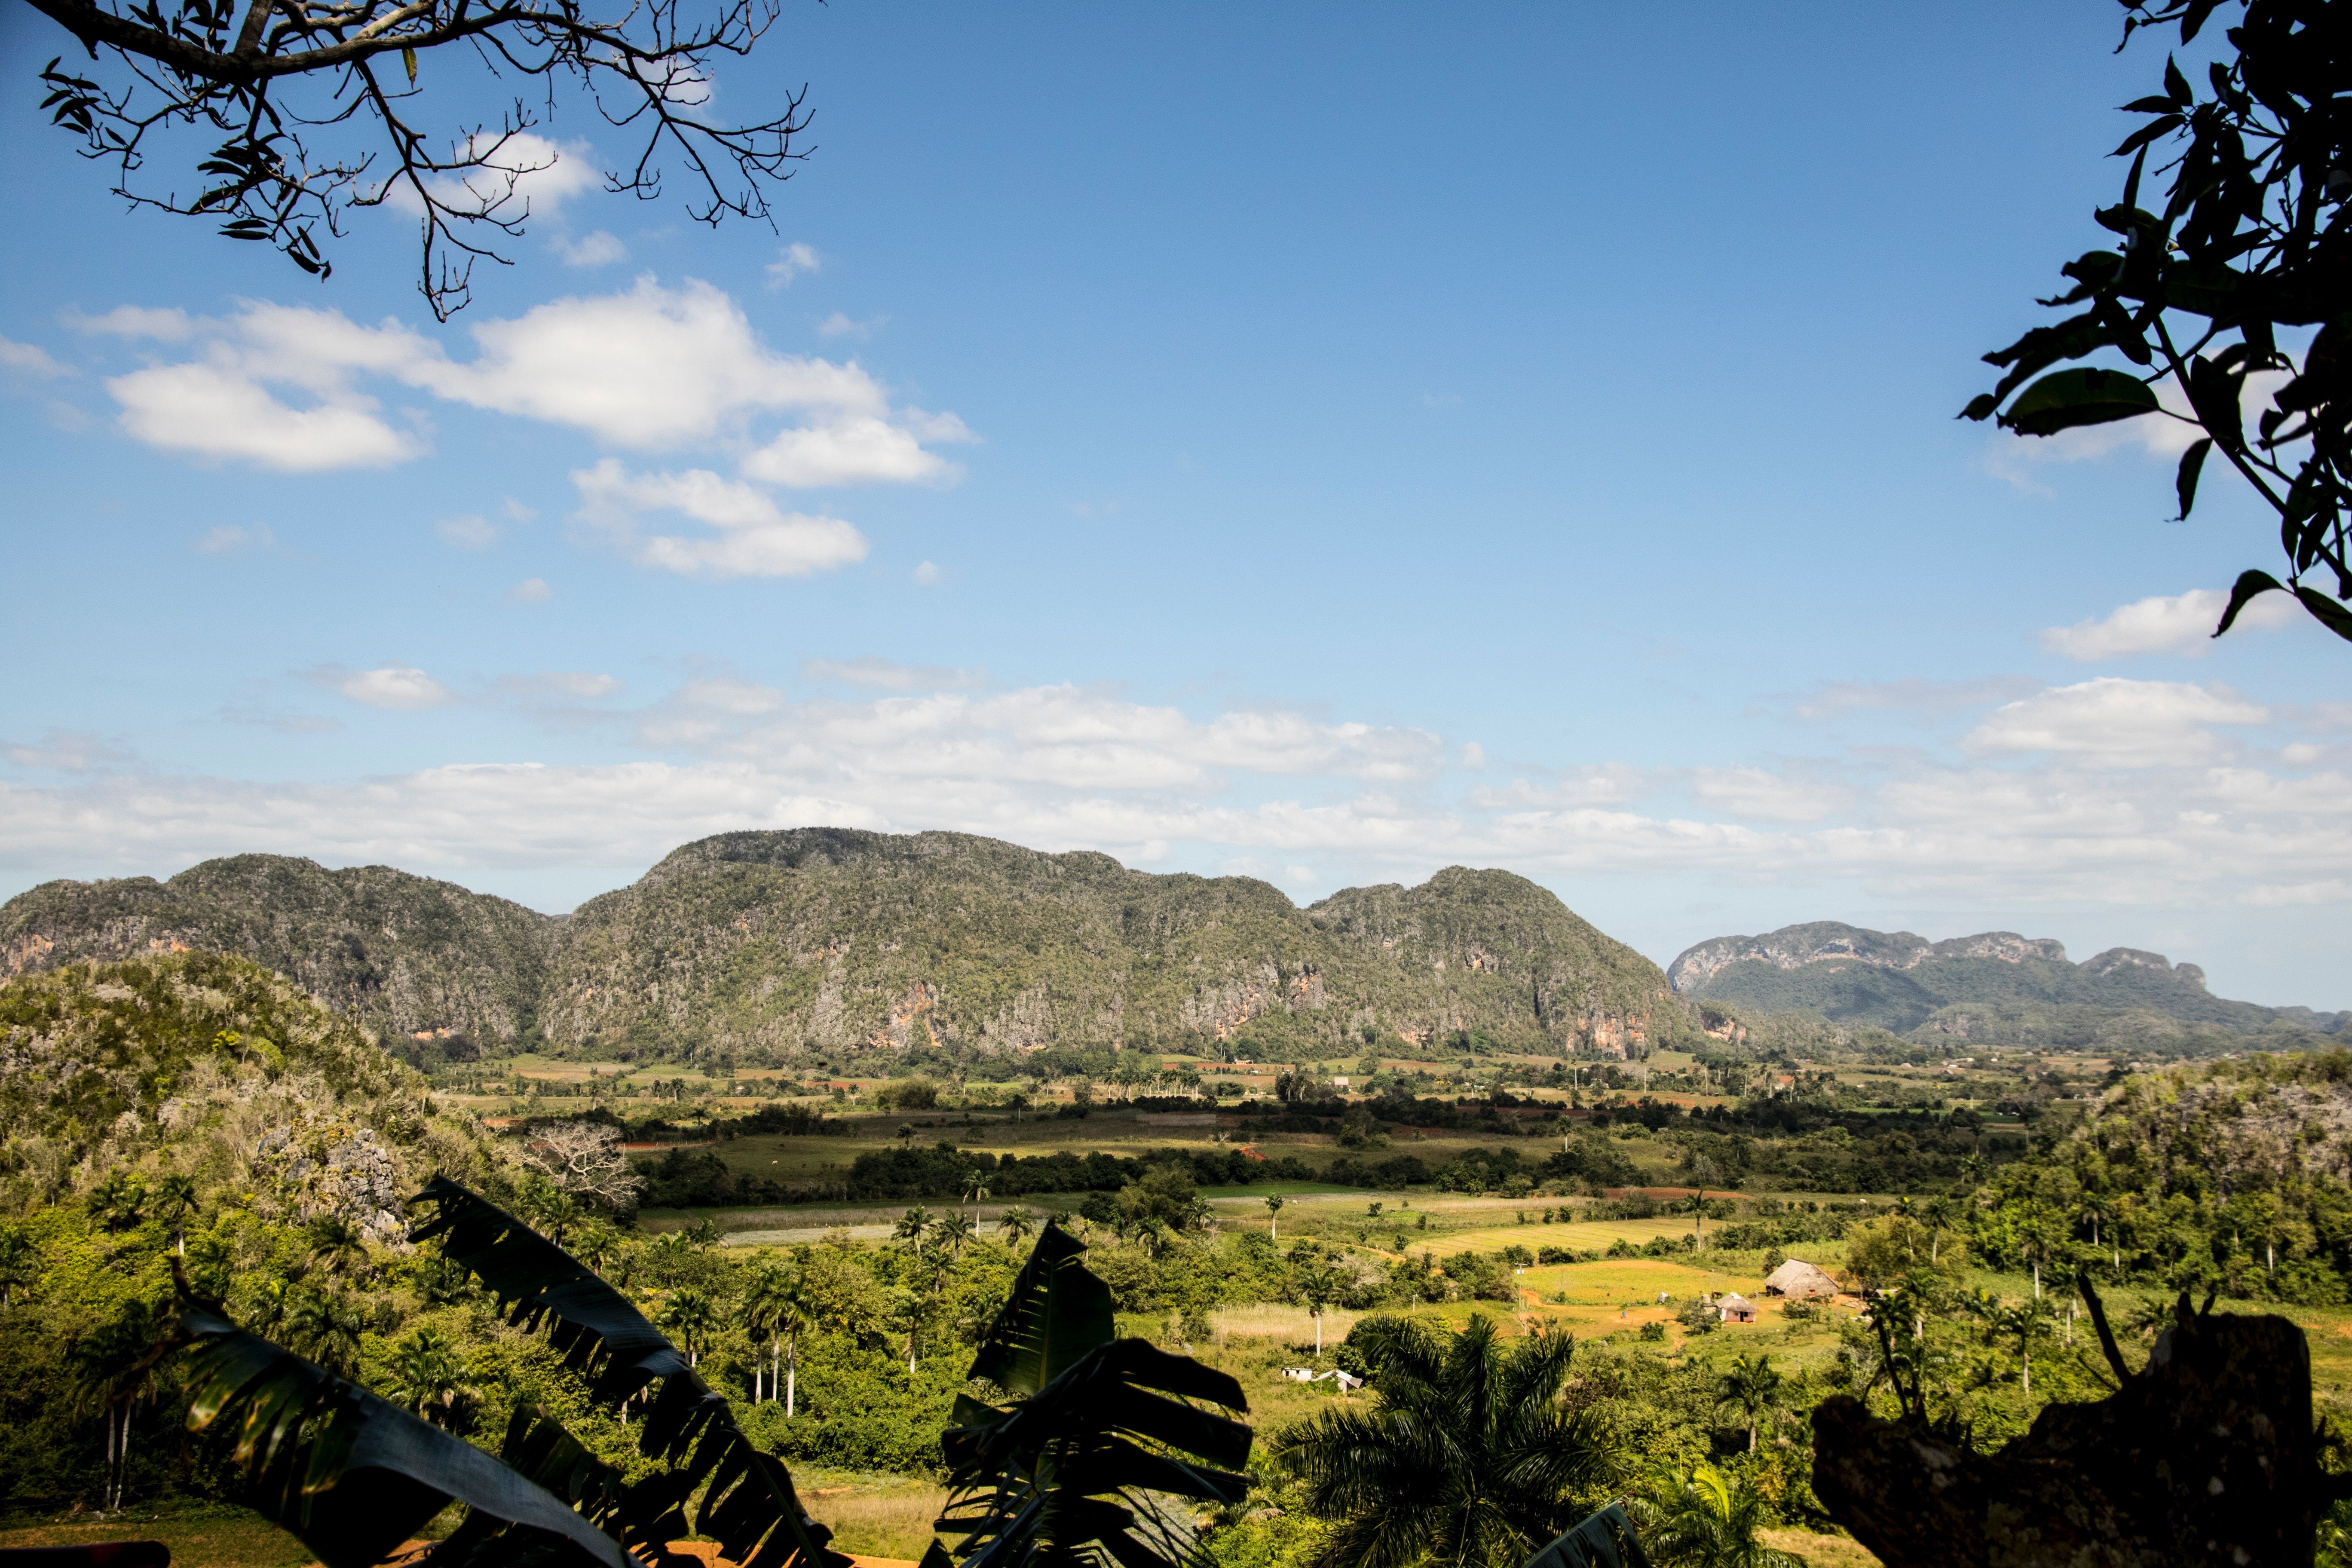 Lush greenery in the Vinales Valley